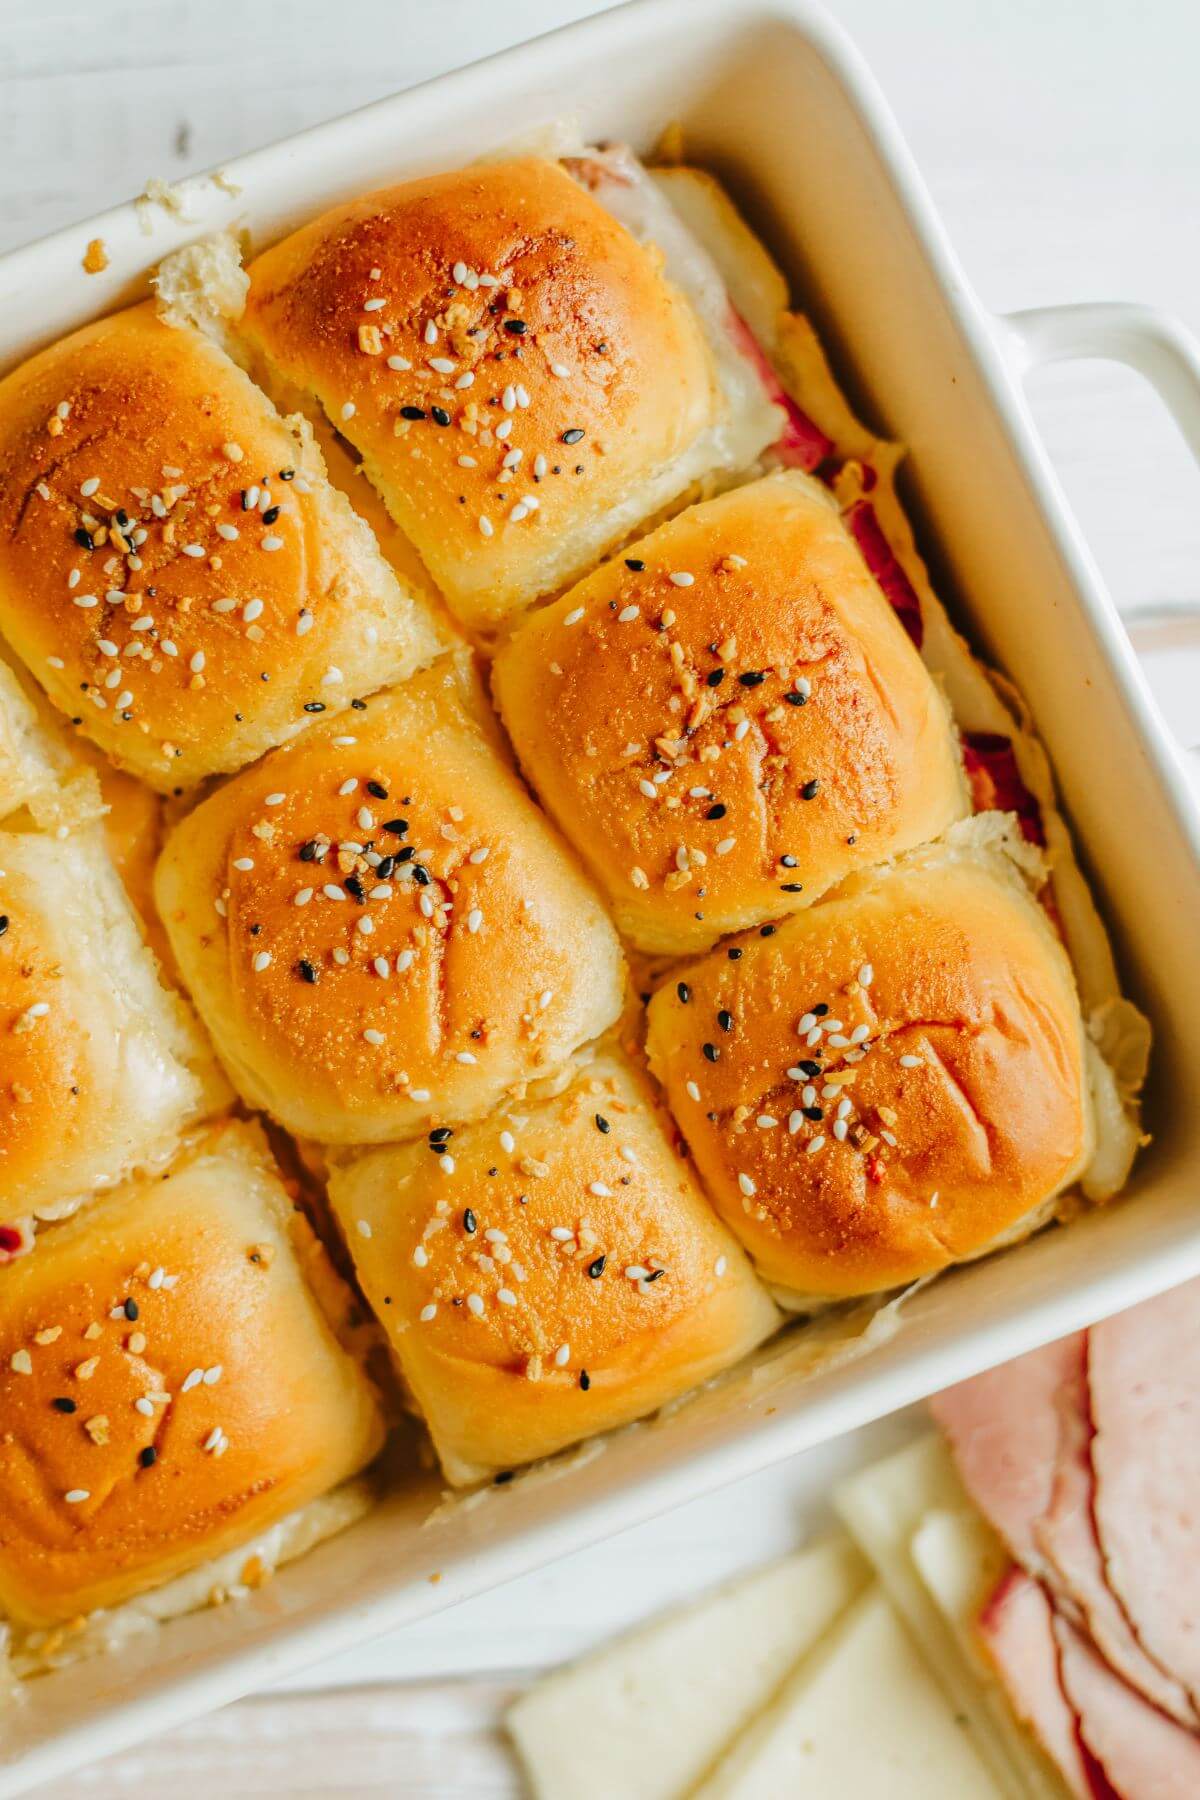 Baked sliders with seasoning on top are shown in a baking dish at an angle.